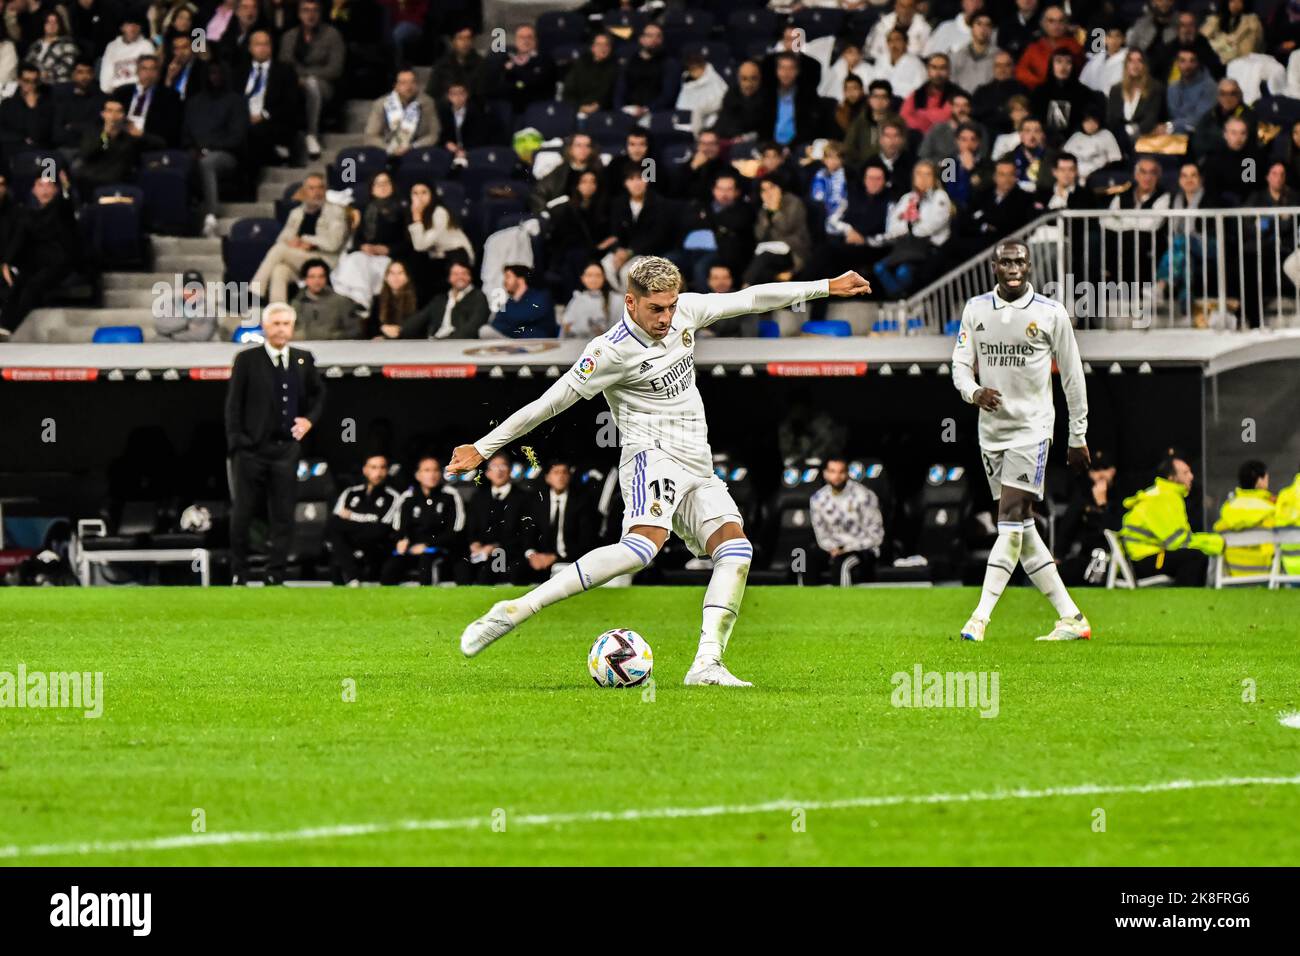 MADRID, SPAIN - OCTOBER 22: Federico Valverde of Real Madrid CF during the match between Real Madrid CF and Sevilla CF of La Liga Santander on October 22, 2022 at Santiago Bernabeu of Madrid, Spain. (Photo by Samuel Carreño/PxImages) Stock Photo